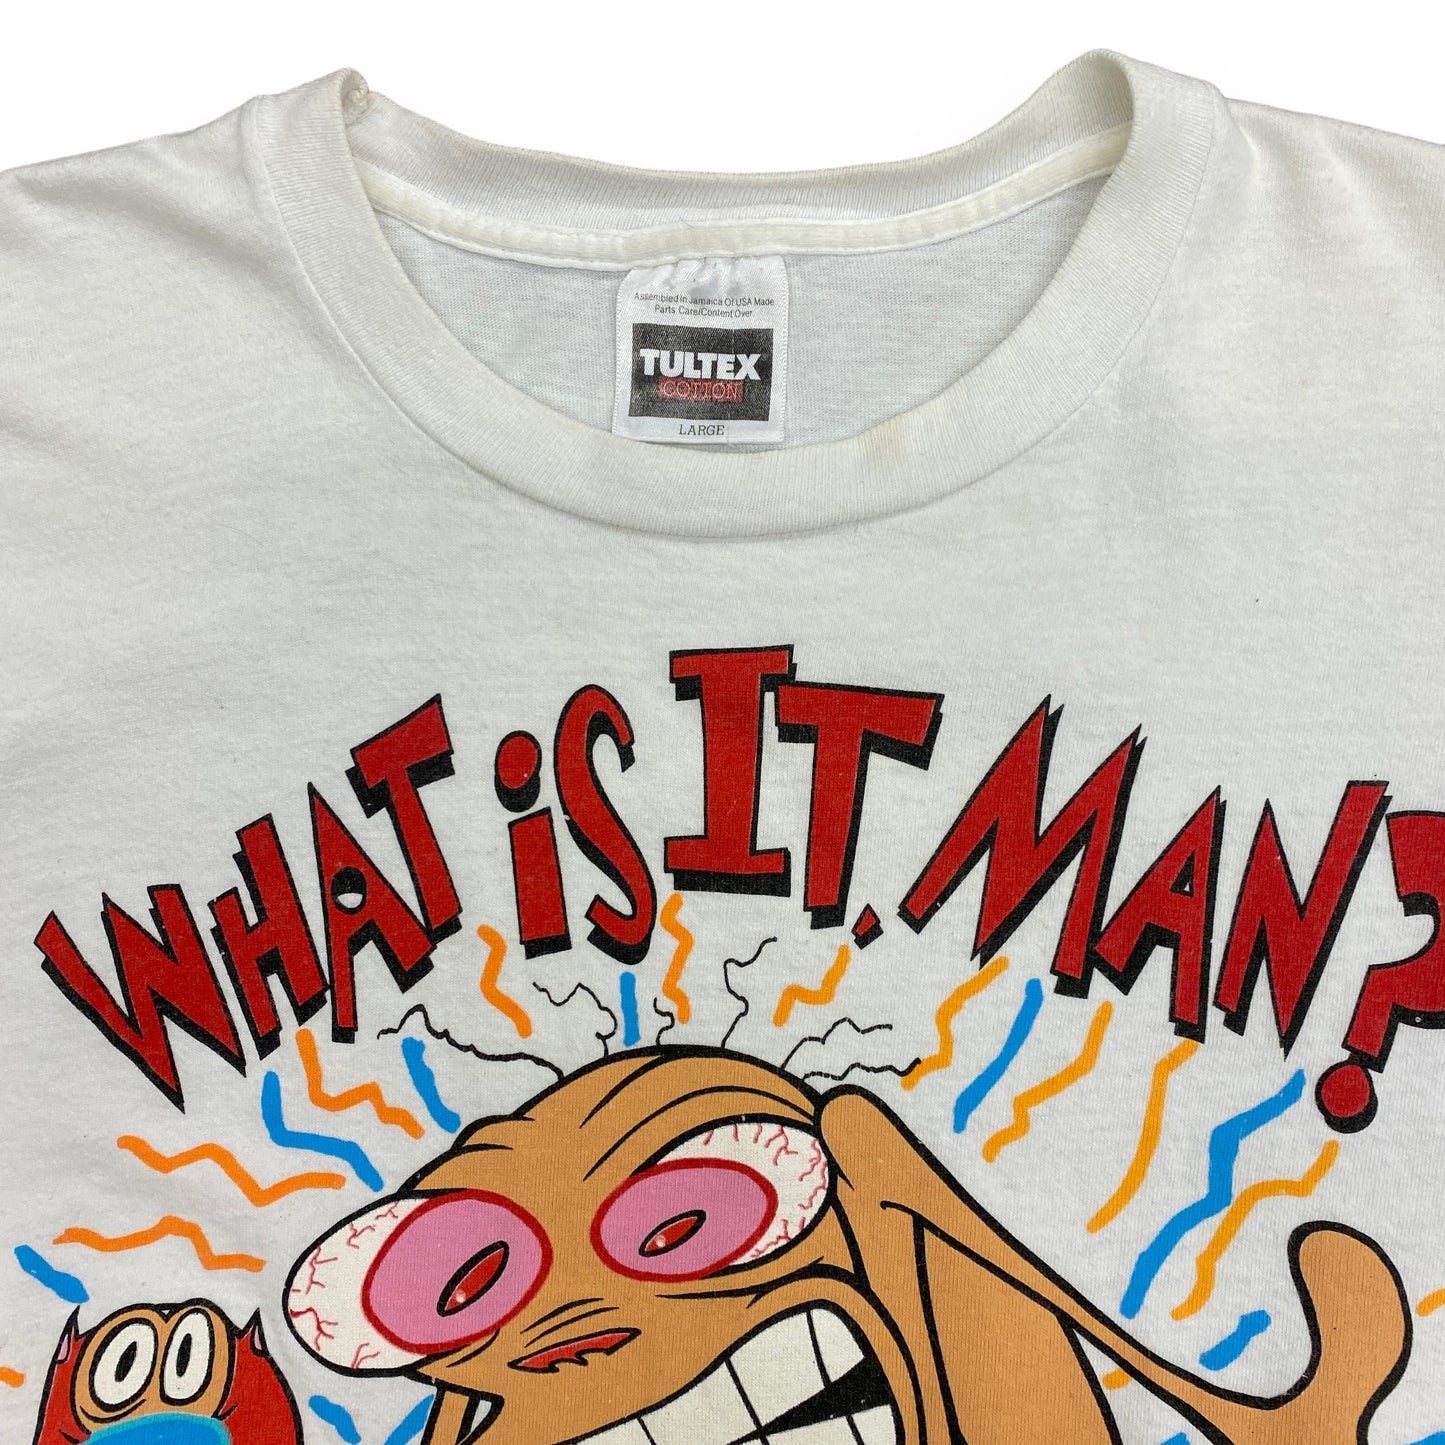 Vintage 1992 The Ren & Stimpy Show "What is It, Man?" Tee - Size Large